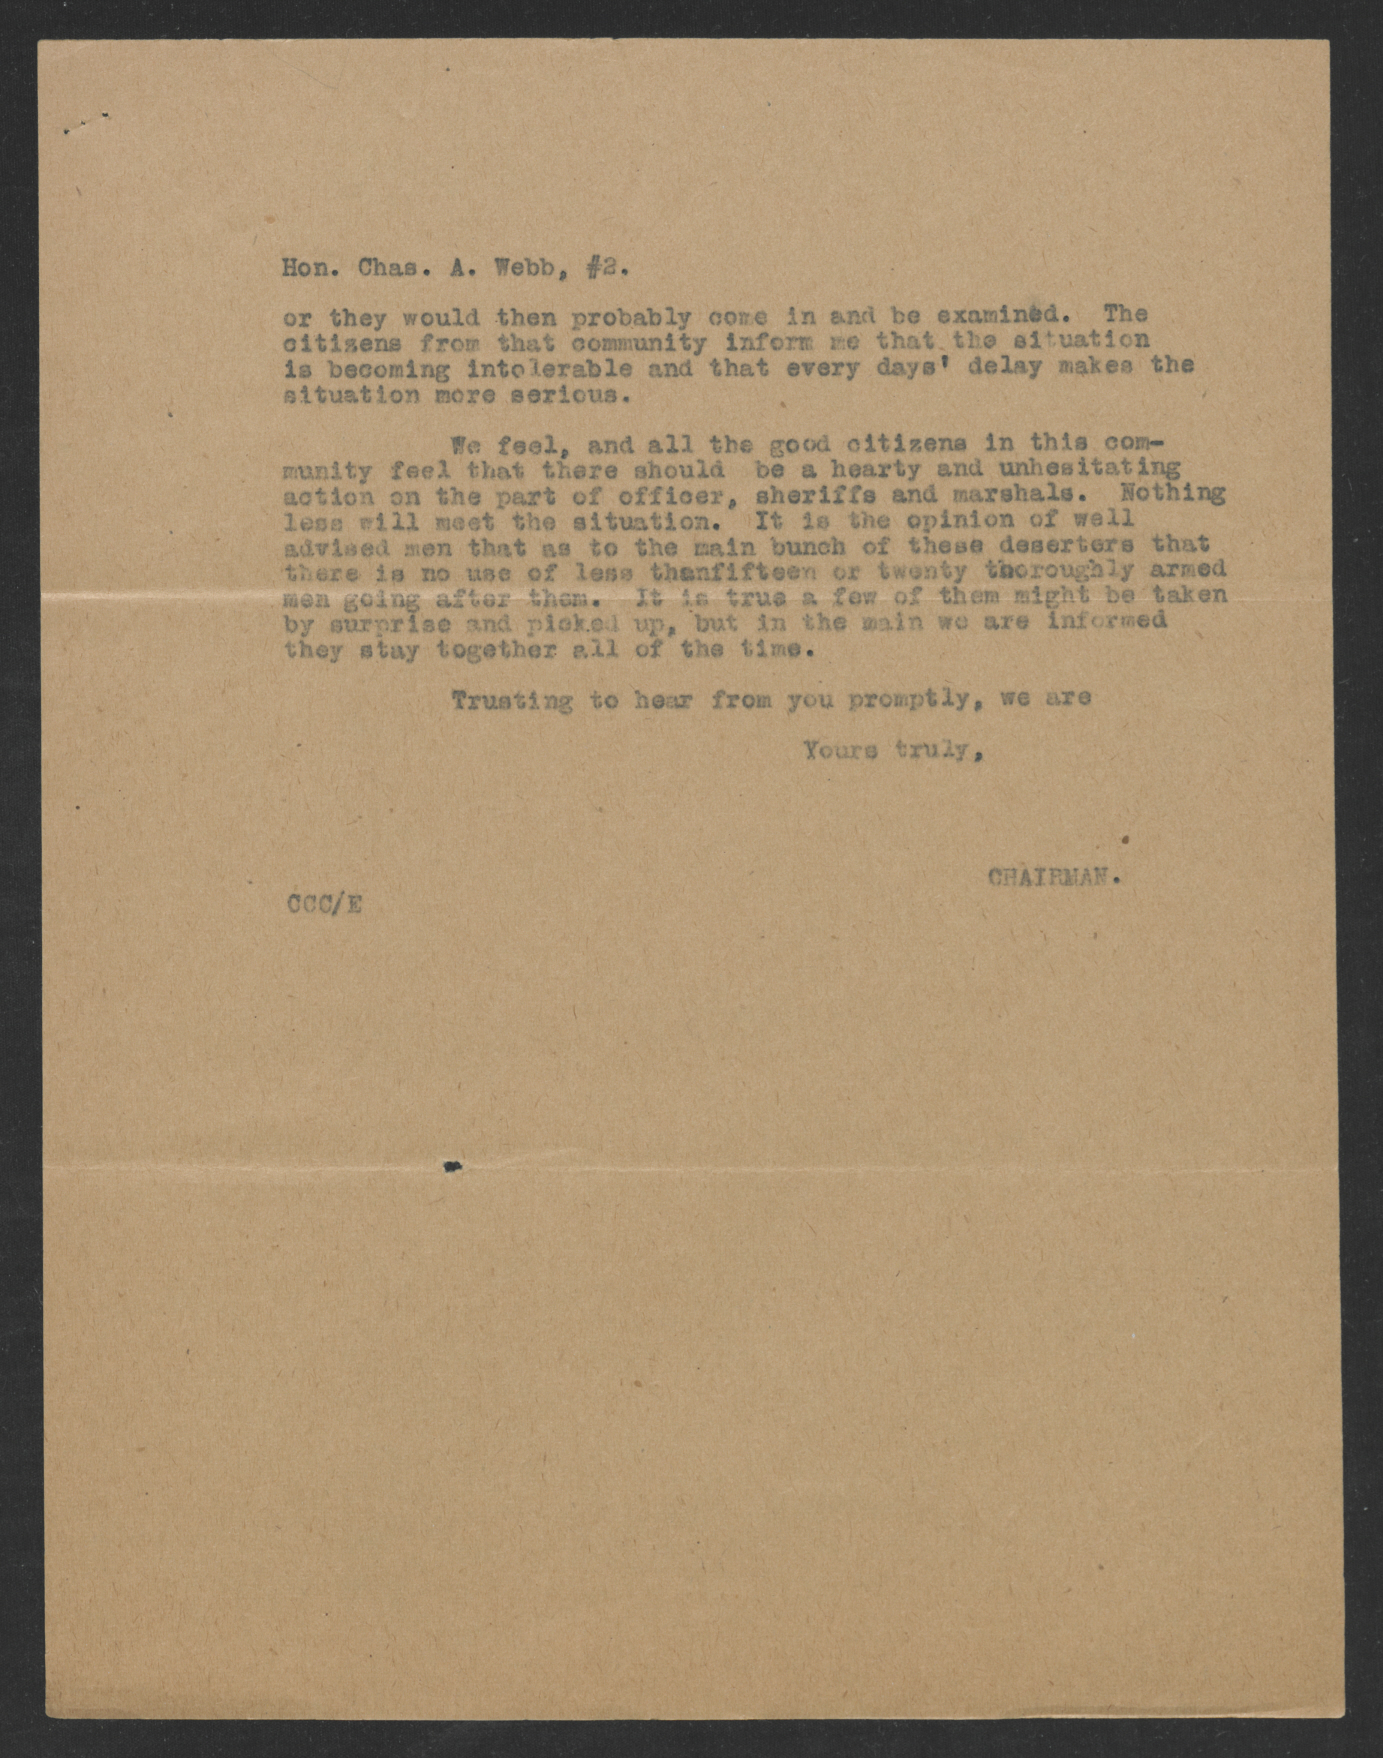 Letter from Coleman C. Cowan to Charles A. Webb, March 30, 1918, page 2